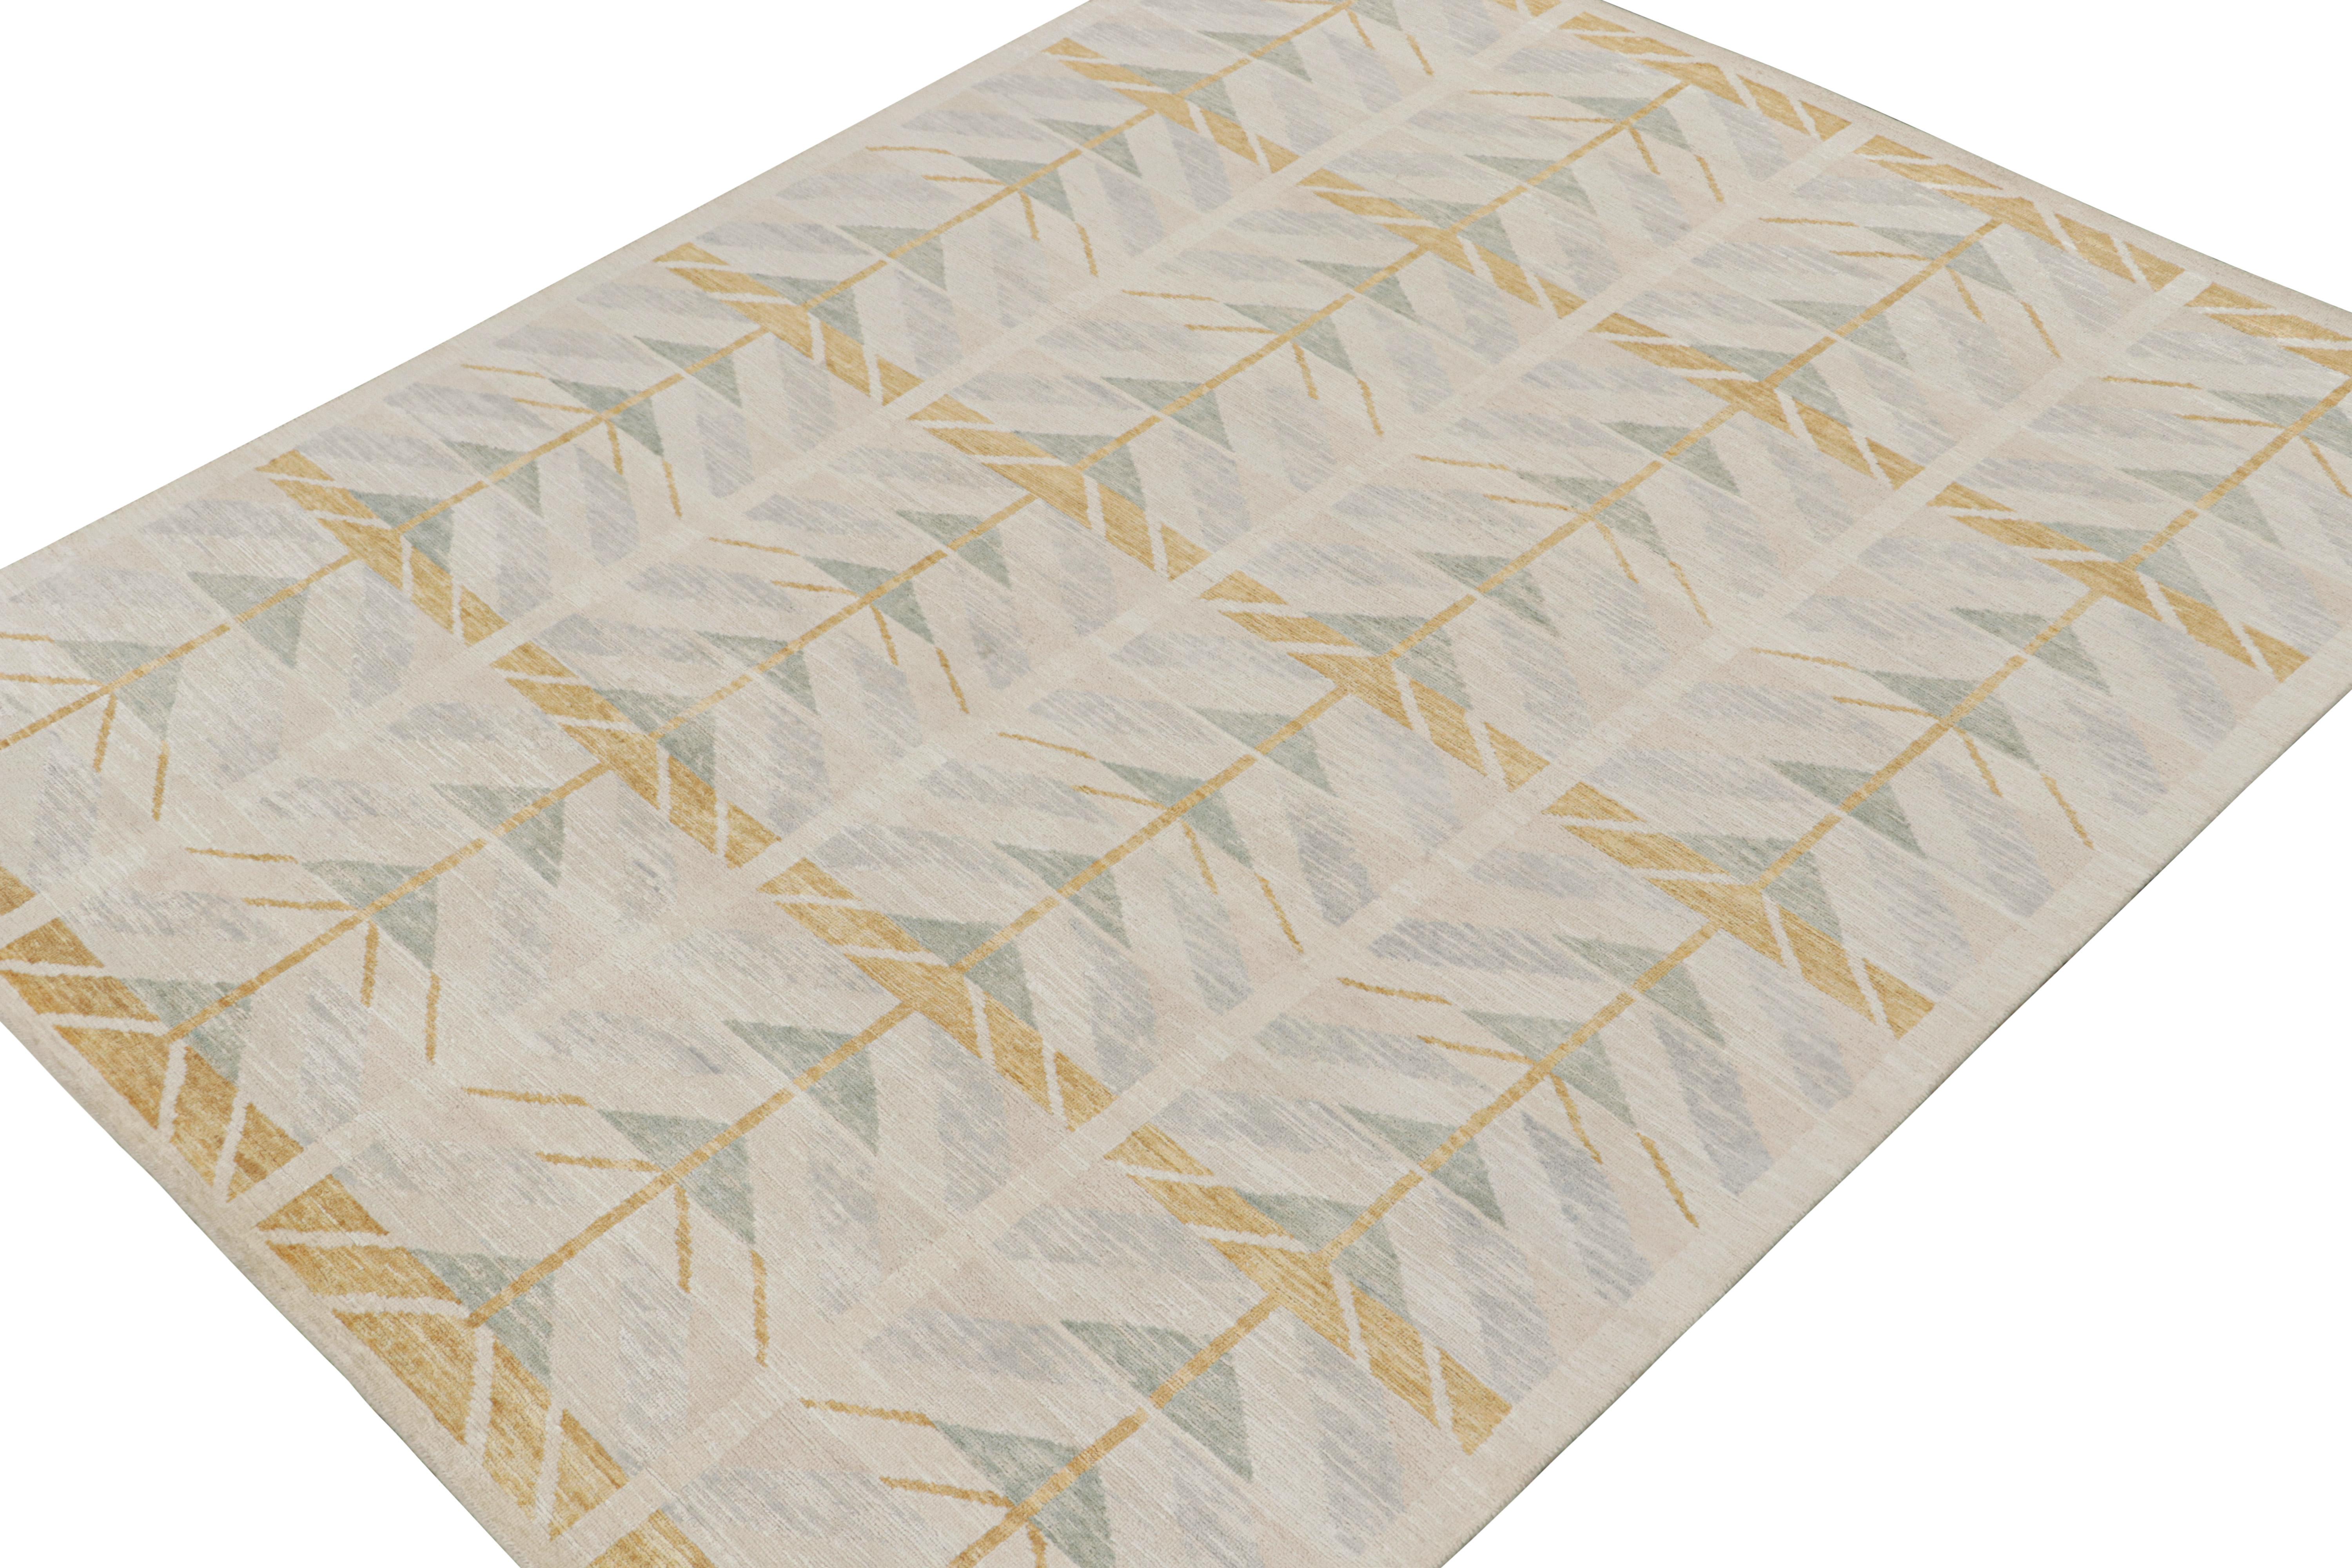 Indian Rug & Kilim’s Scandinavian-Style Rug with Gold & Beige Geometric Patterns For Sale